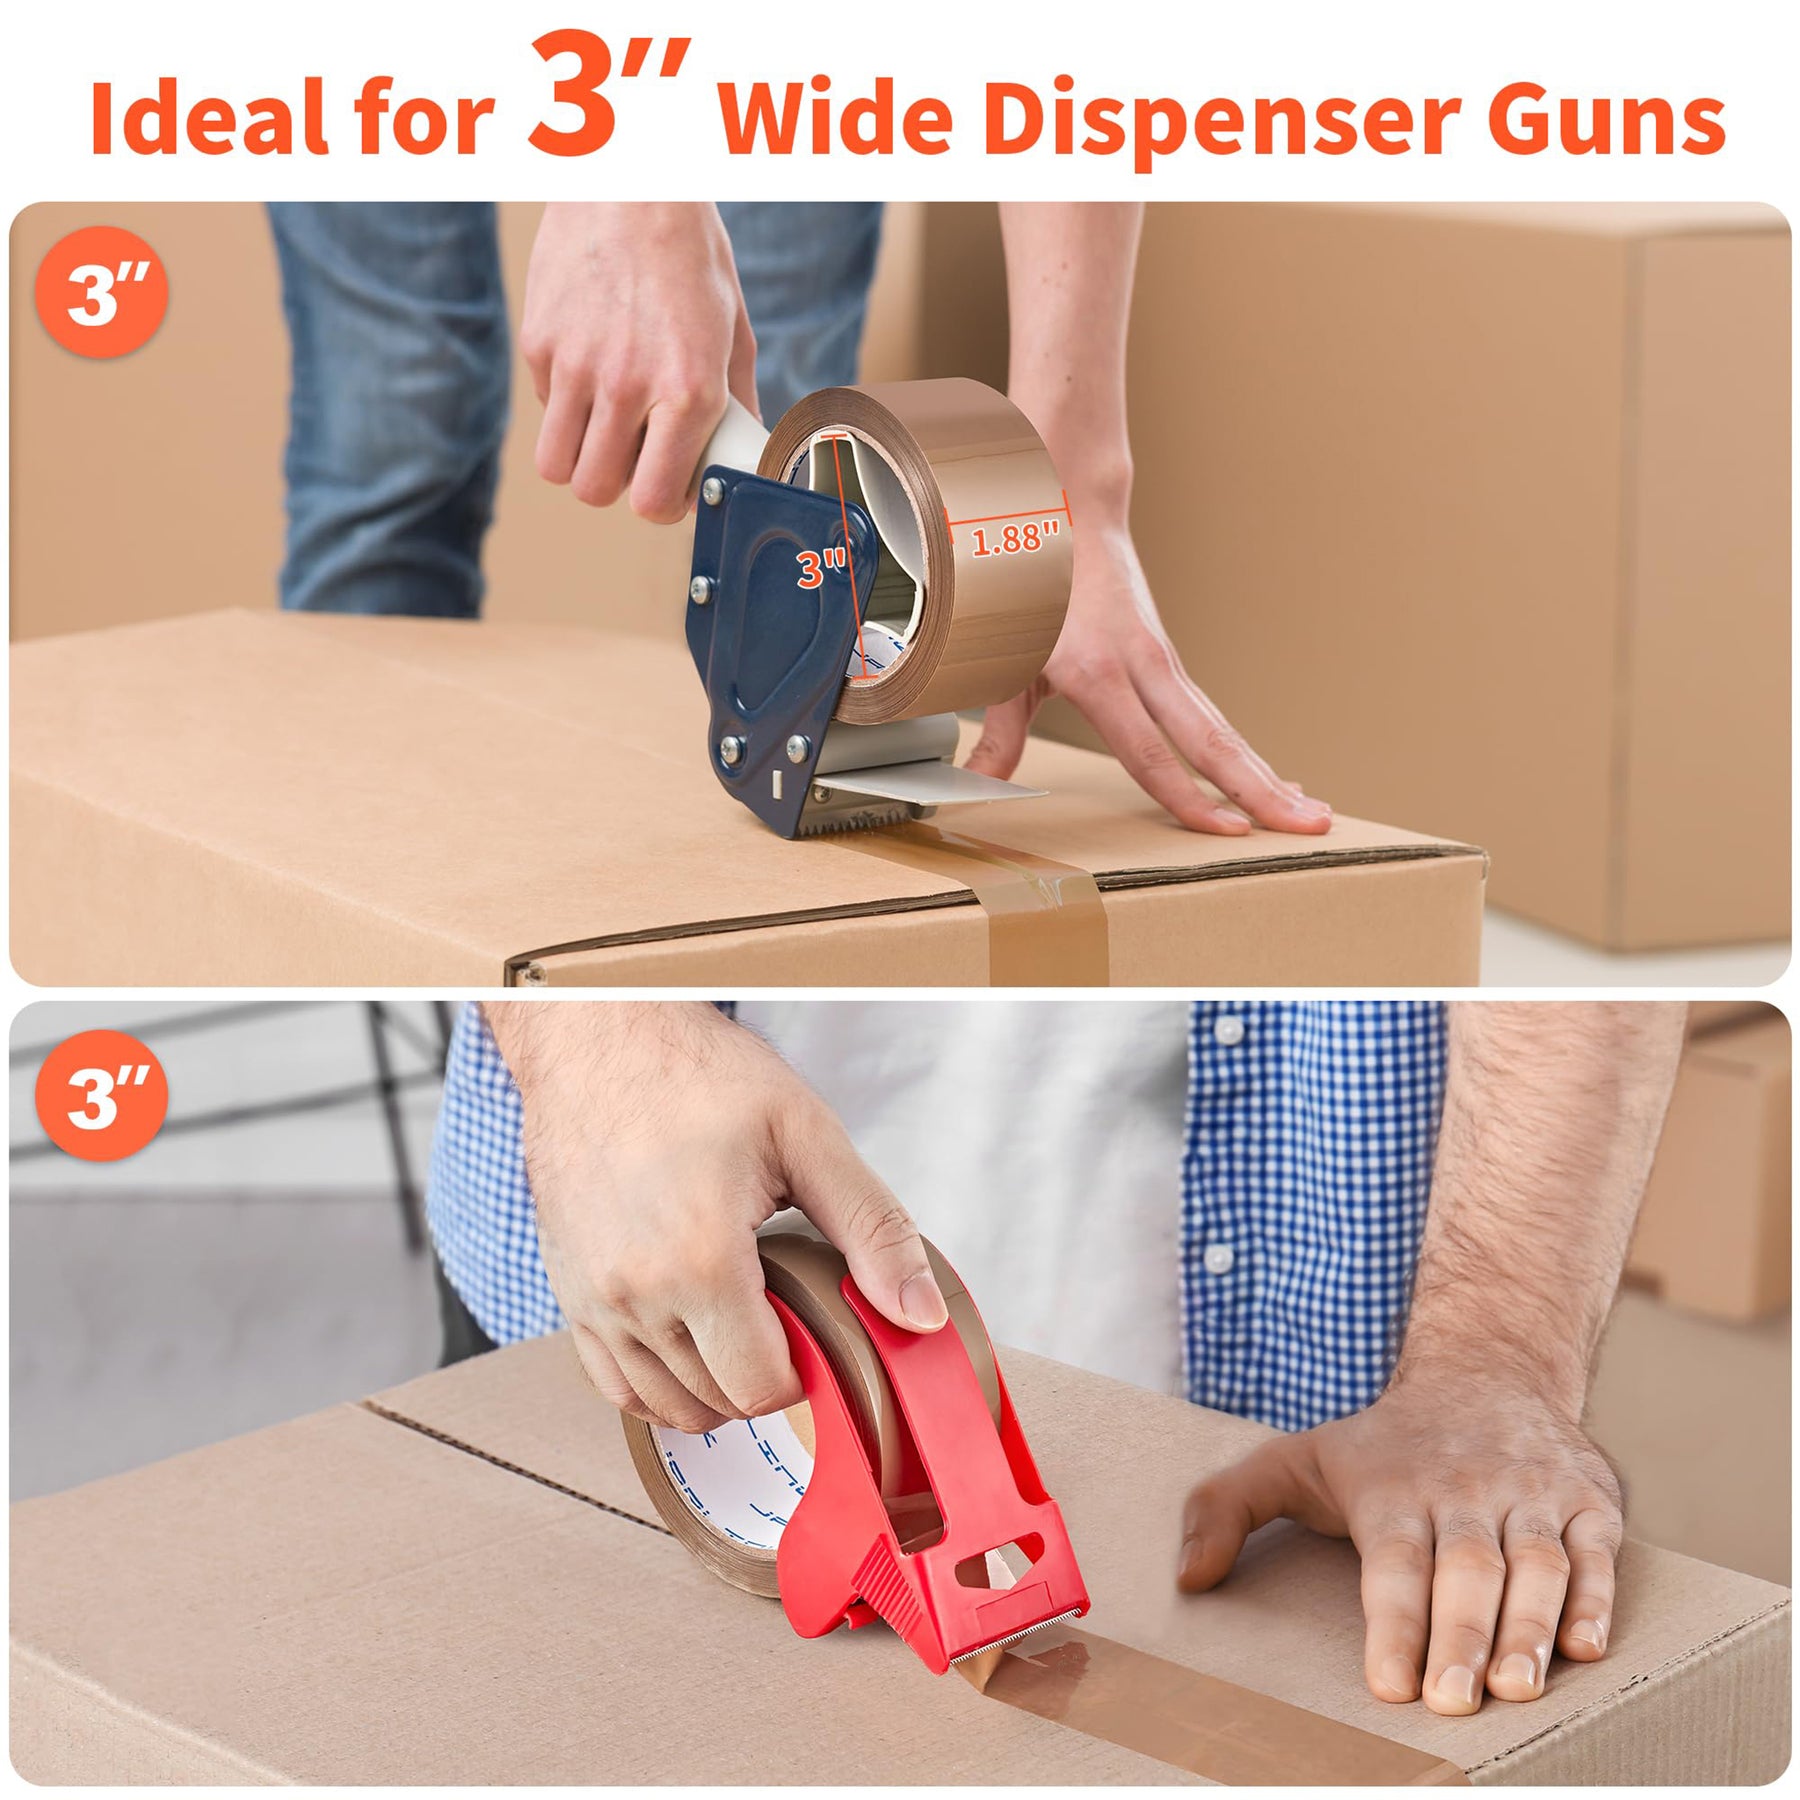 JARLINK Packing Tape Dispenser Gun (2 Pack) with 2 Rolls Tape, 2 inche